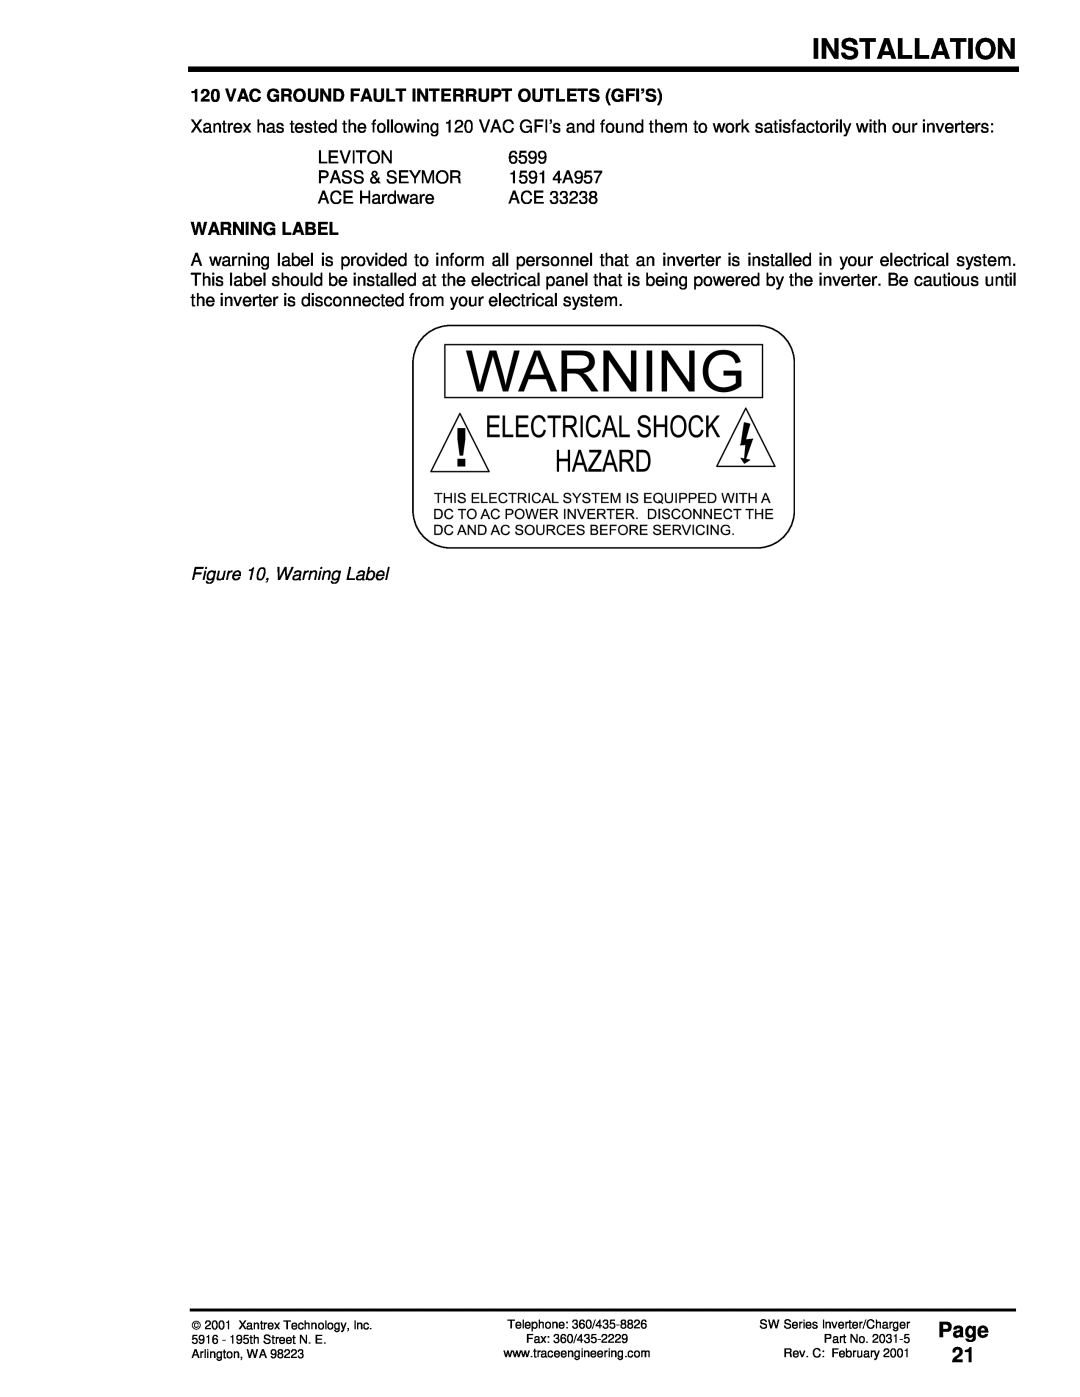 Xantrex Technology SW Series owner manual Page 21, Vac Ground Fault Interrupt Outlets Gfi’S, Warning Label, Installation 